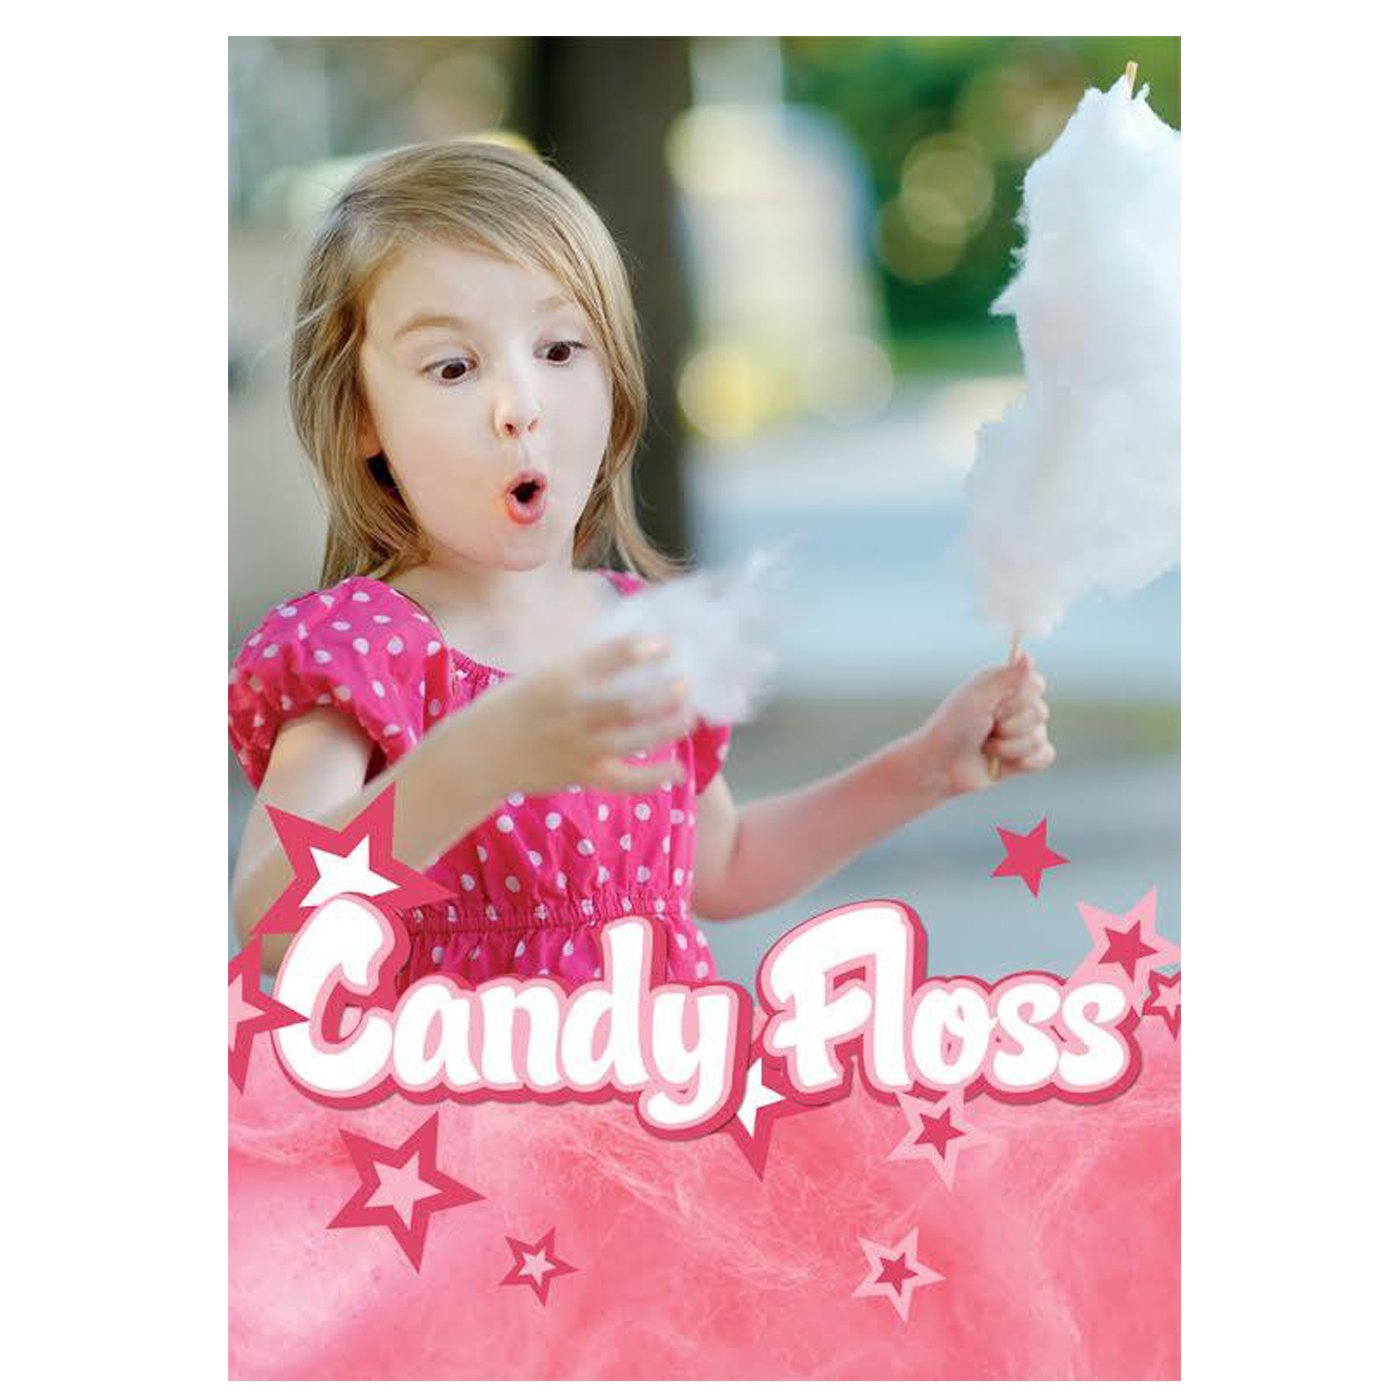 Candy Floss Poster